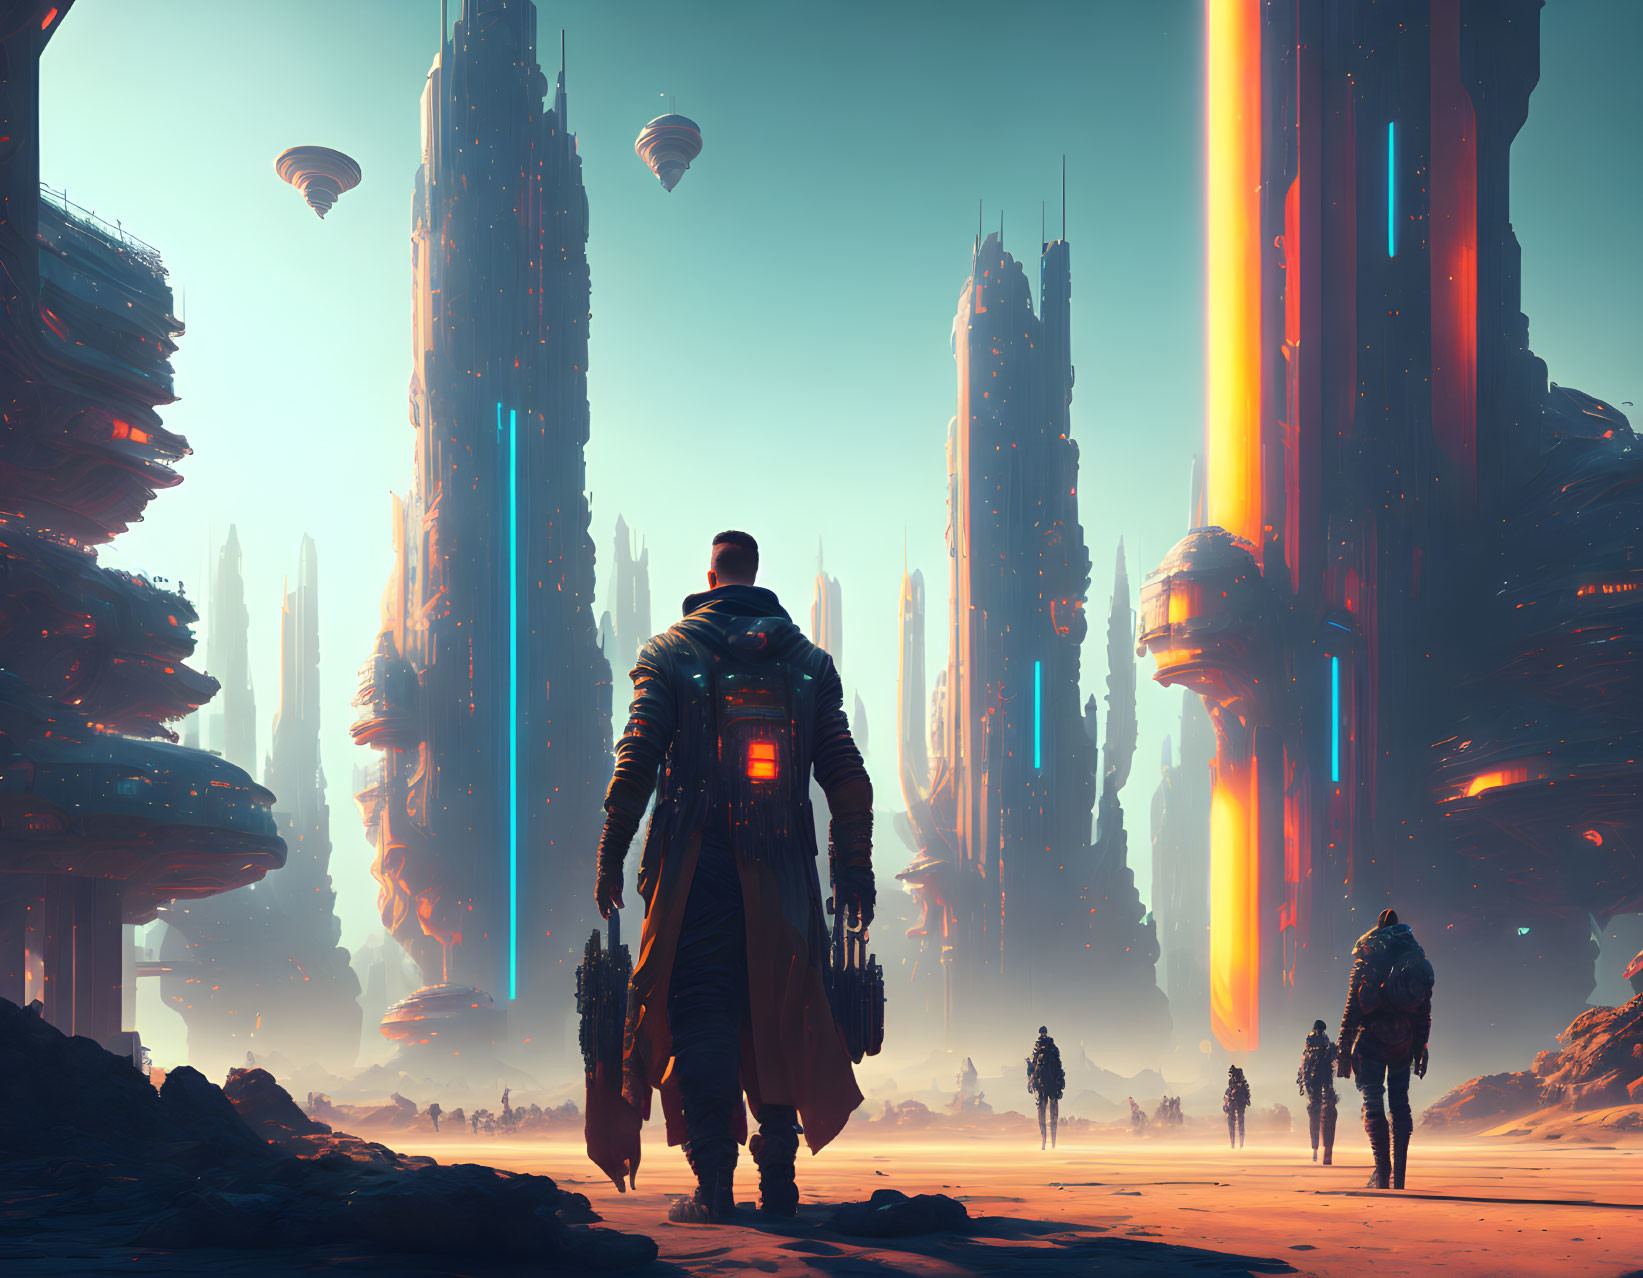 Futuristic outfit person views alien landscape with towering structures and flying vehicles.